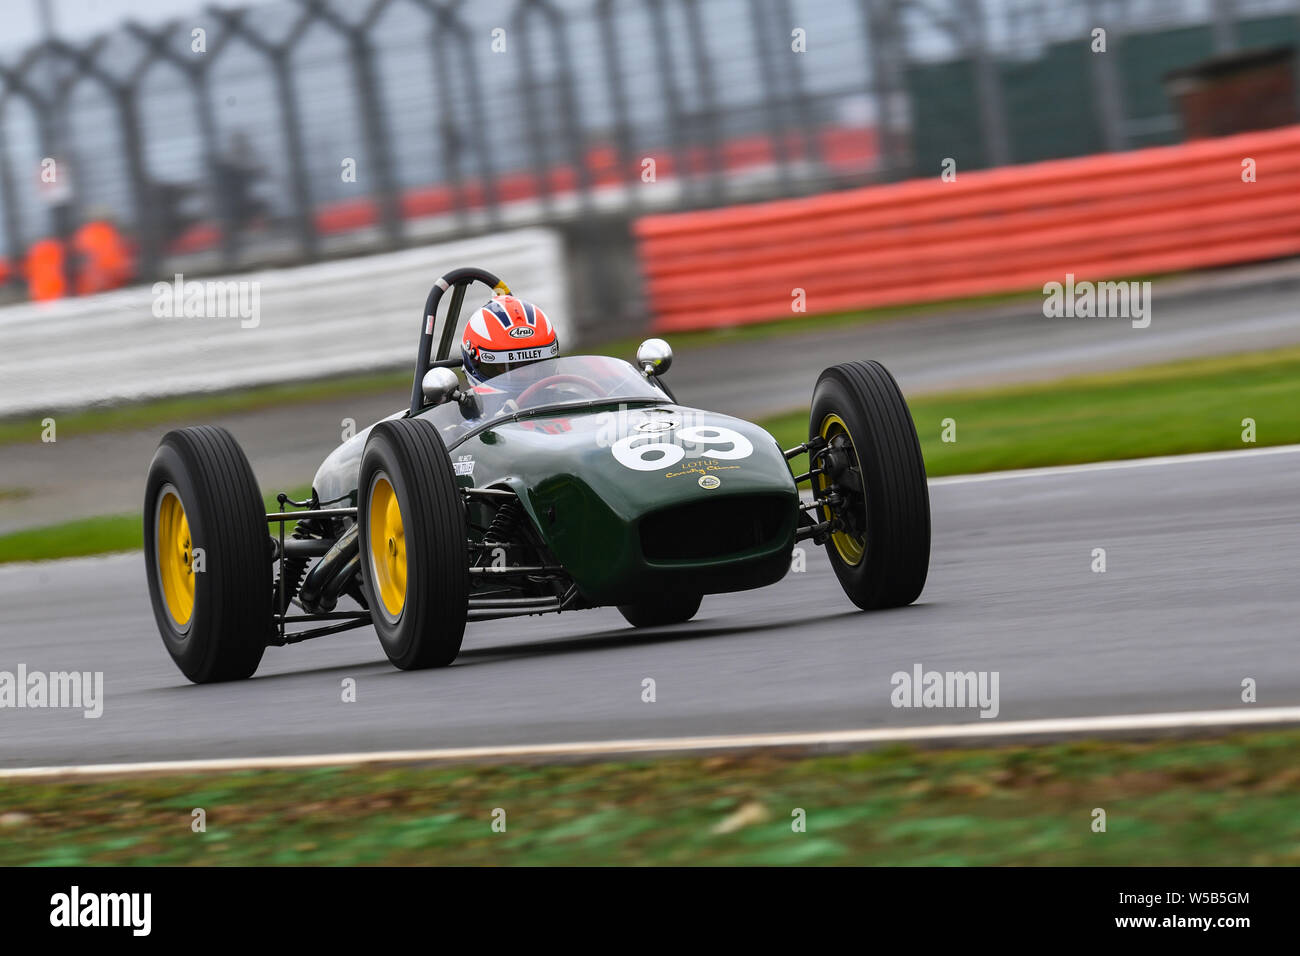 TOWCESTER, United Kingdom. 27th July, 2019. Benn Tilley (Lotus 18 373) during Gallet Trophy for Pre '66 Grand Prix Cars (HGPCA) of Day Two of Silverstone Classic Moto Racing at Silverstone Circuit on Saturday, July 27, 2019 in TOWCESTER, ENGLAND. Credit: Taka G Wu/Alamy Live News Stock Photo